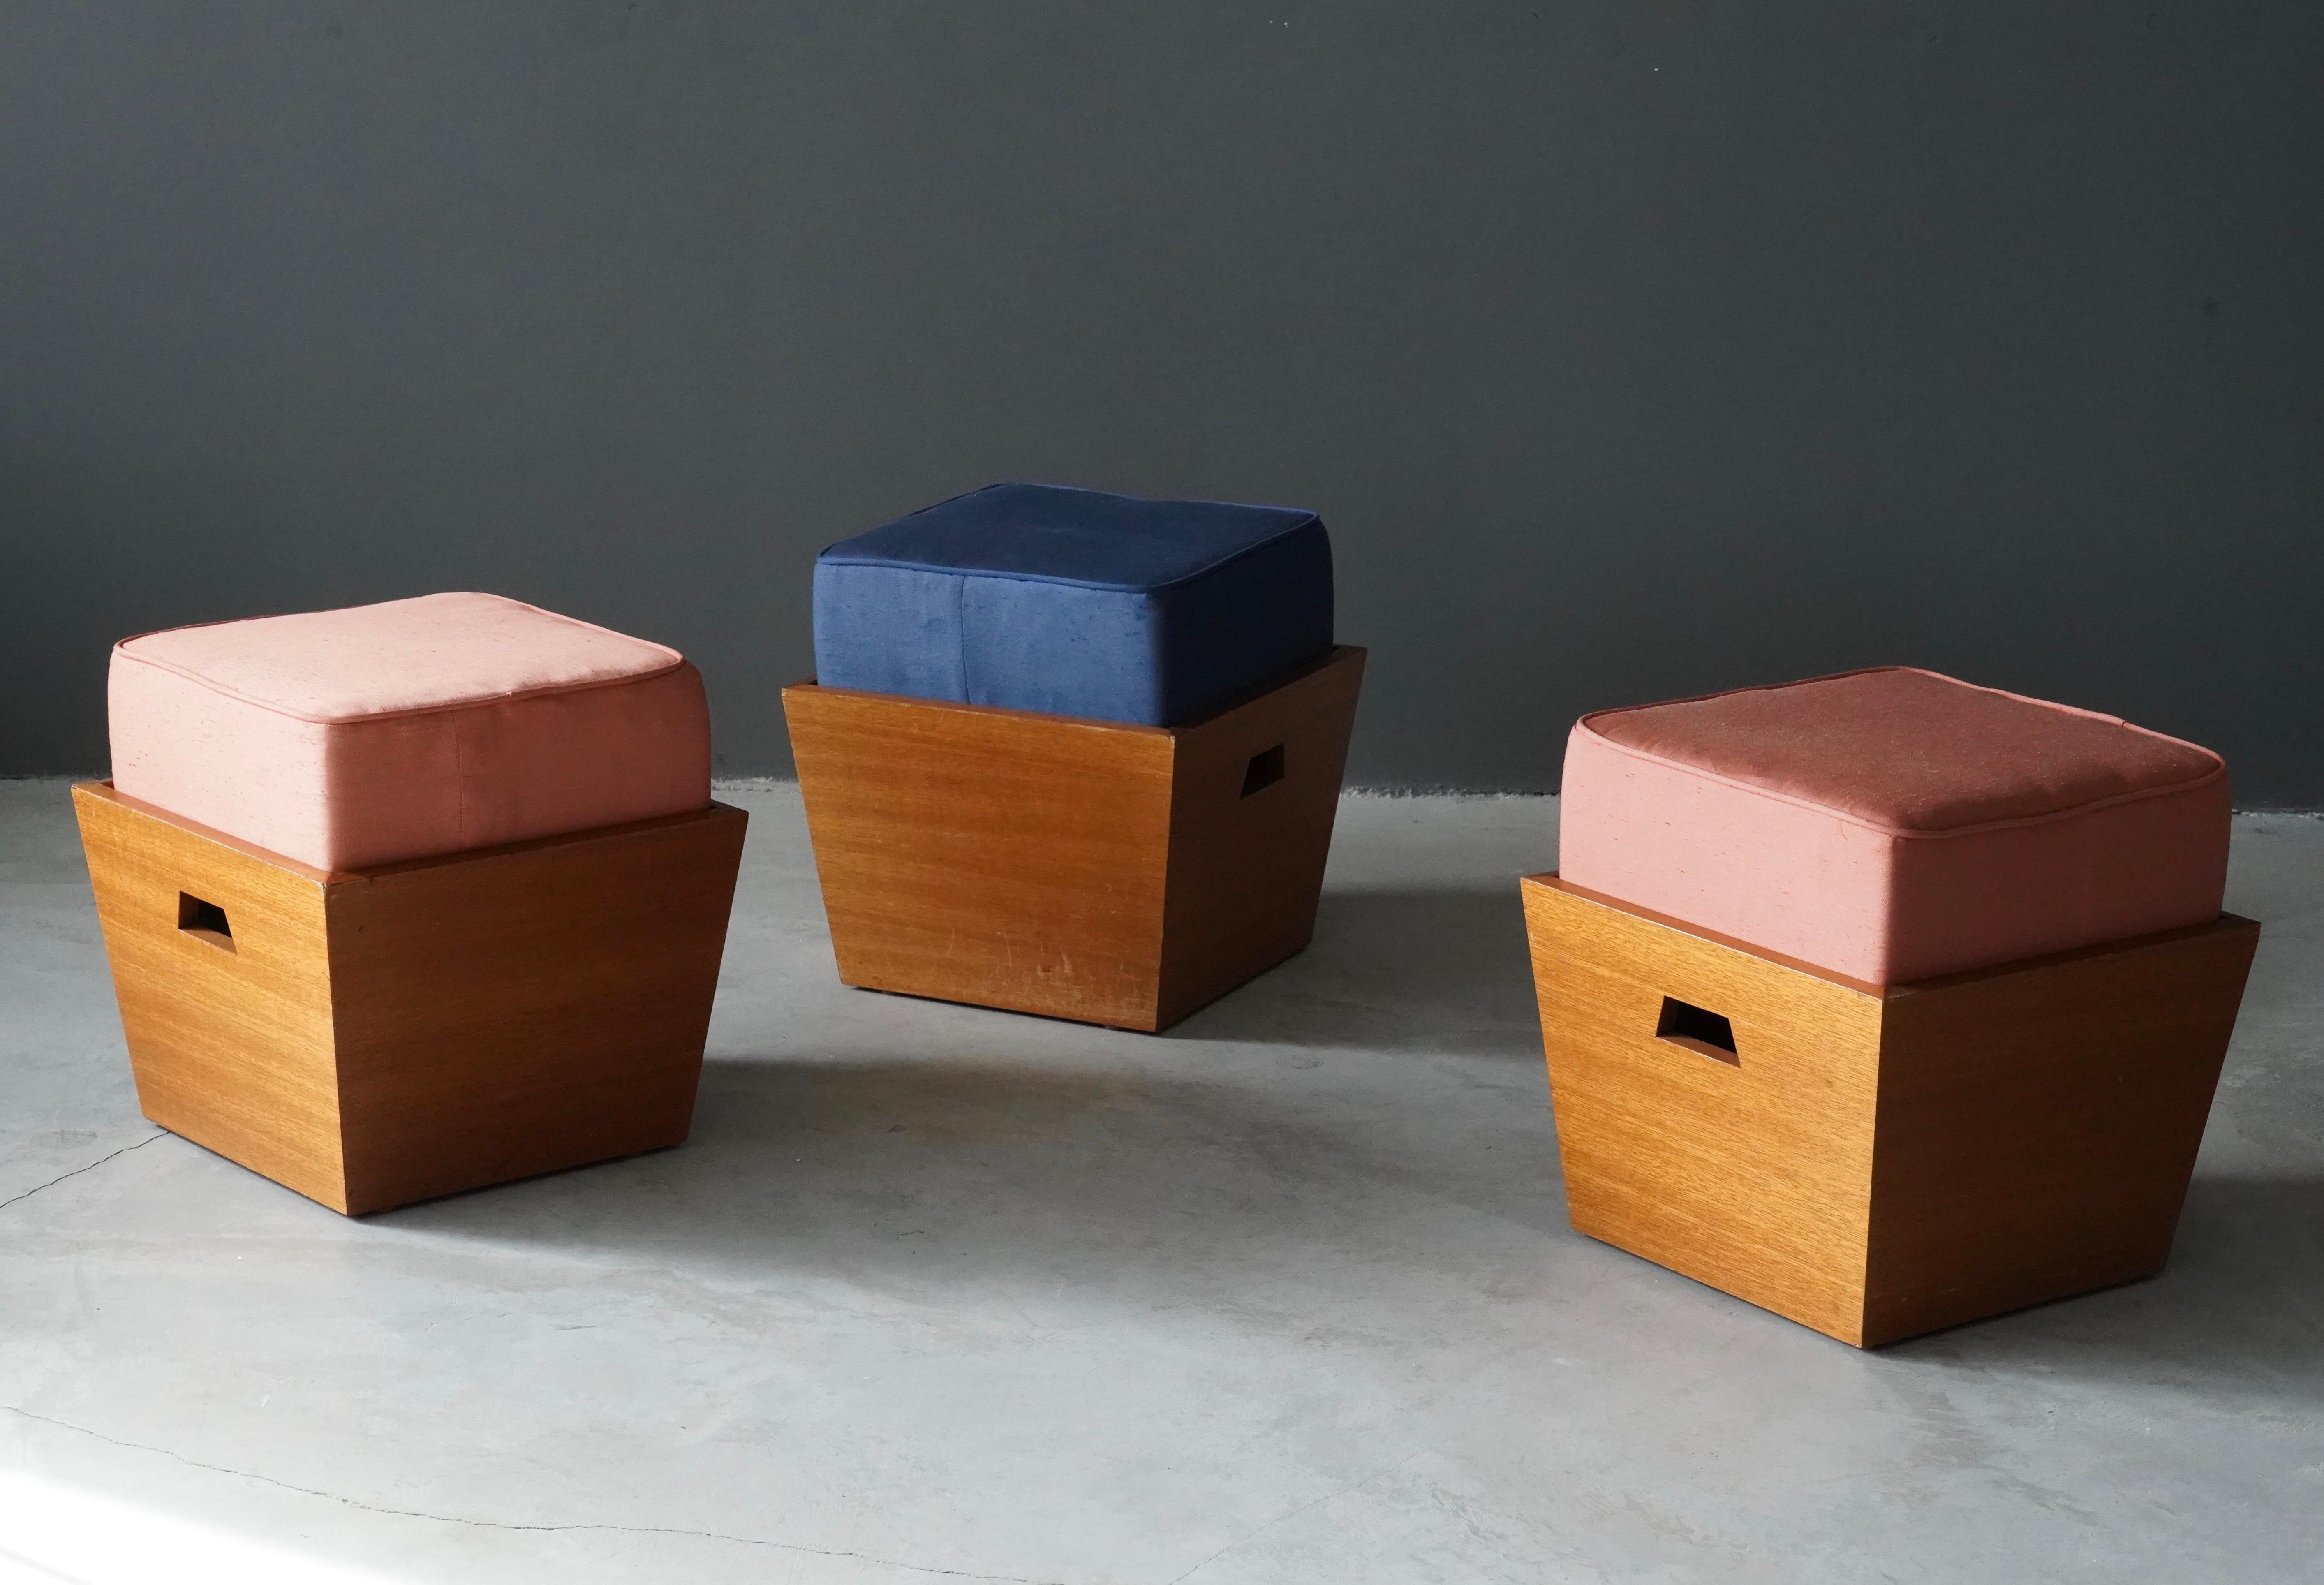 A set of three Hassocks / Stools, by William Wesley Peters, Hassocks from Focus House.

In oak, with vintage fabric in pink and blue fabric.

Produced by Kip Merritt for Taliesin Architects, 1984.

Other designers of the period include Frank